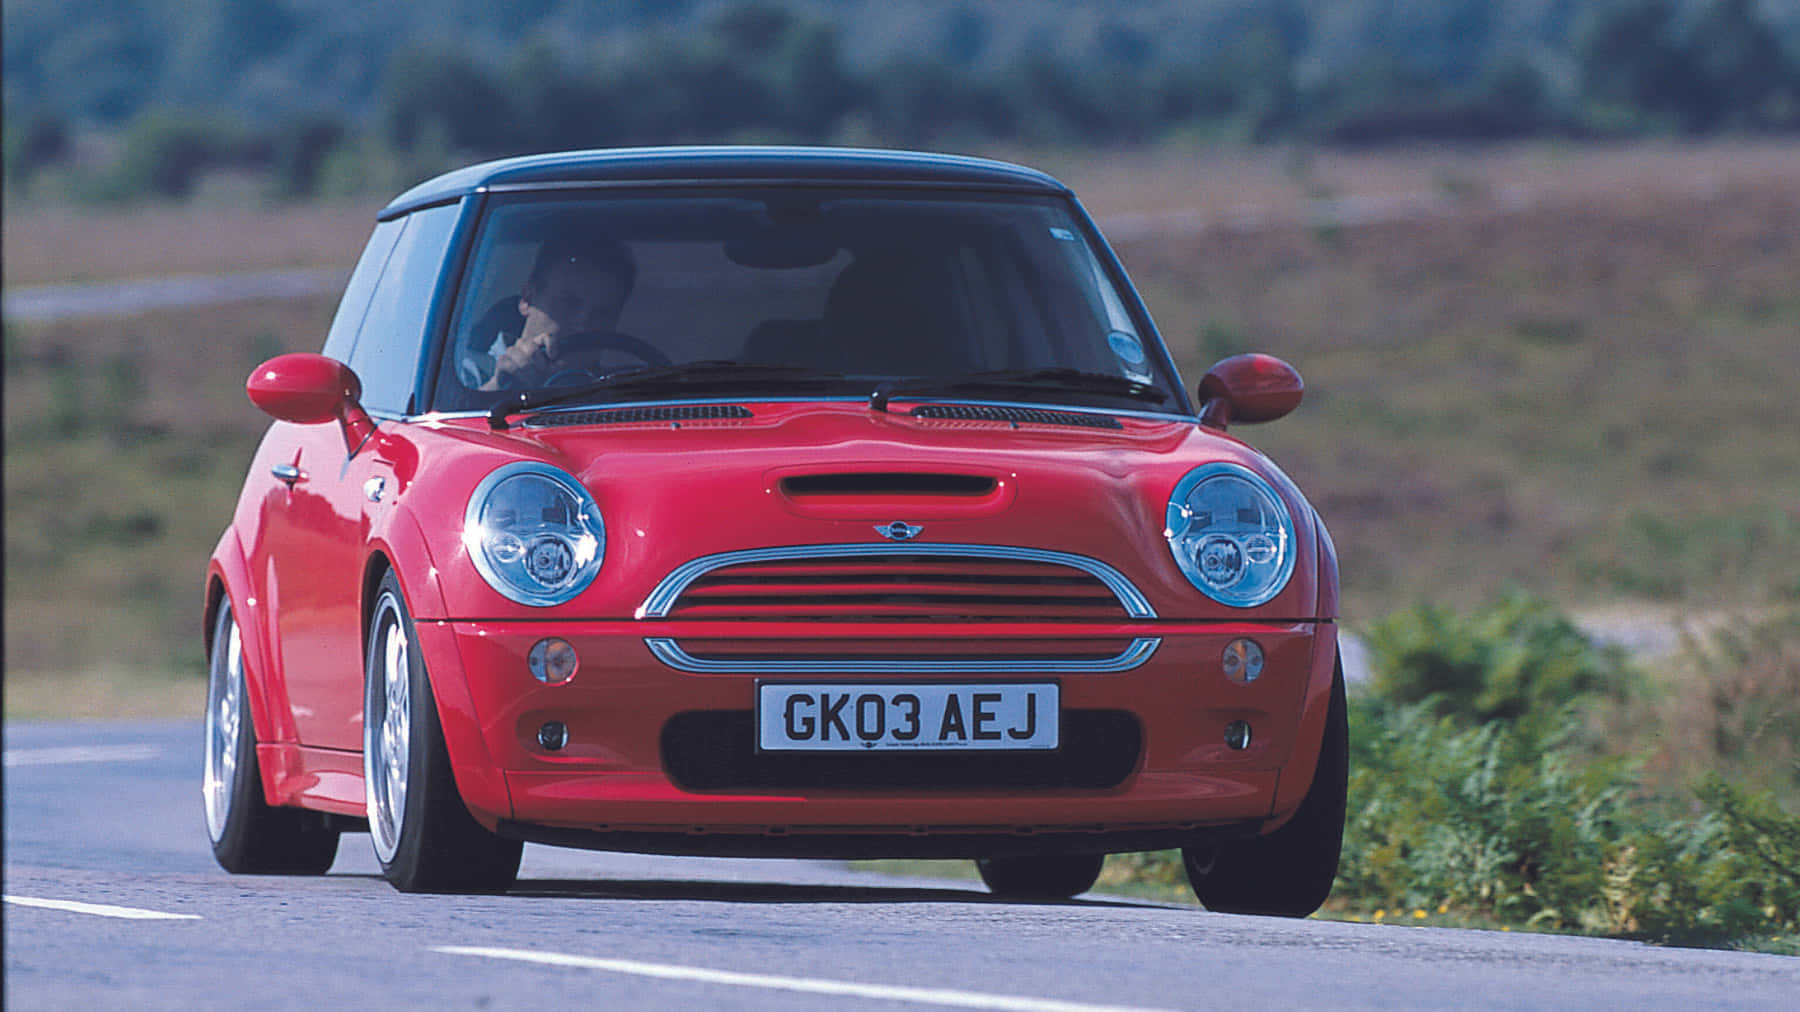 Sporty and Sleek Mini Cooper S on the Open Road Wallpaper